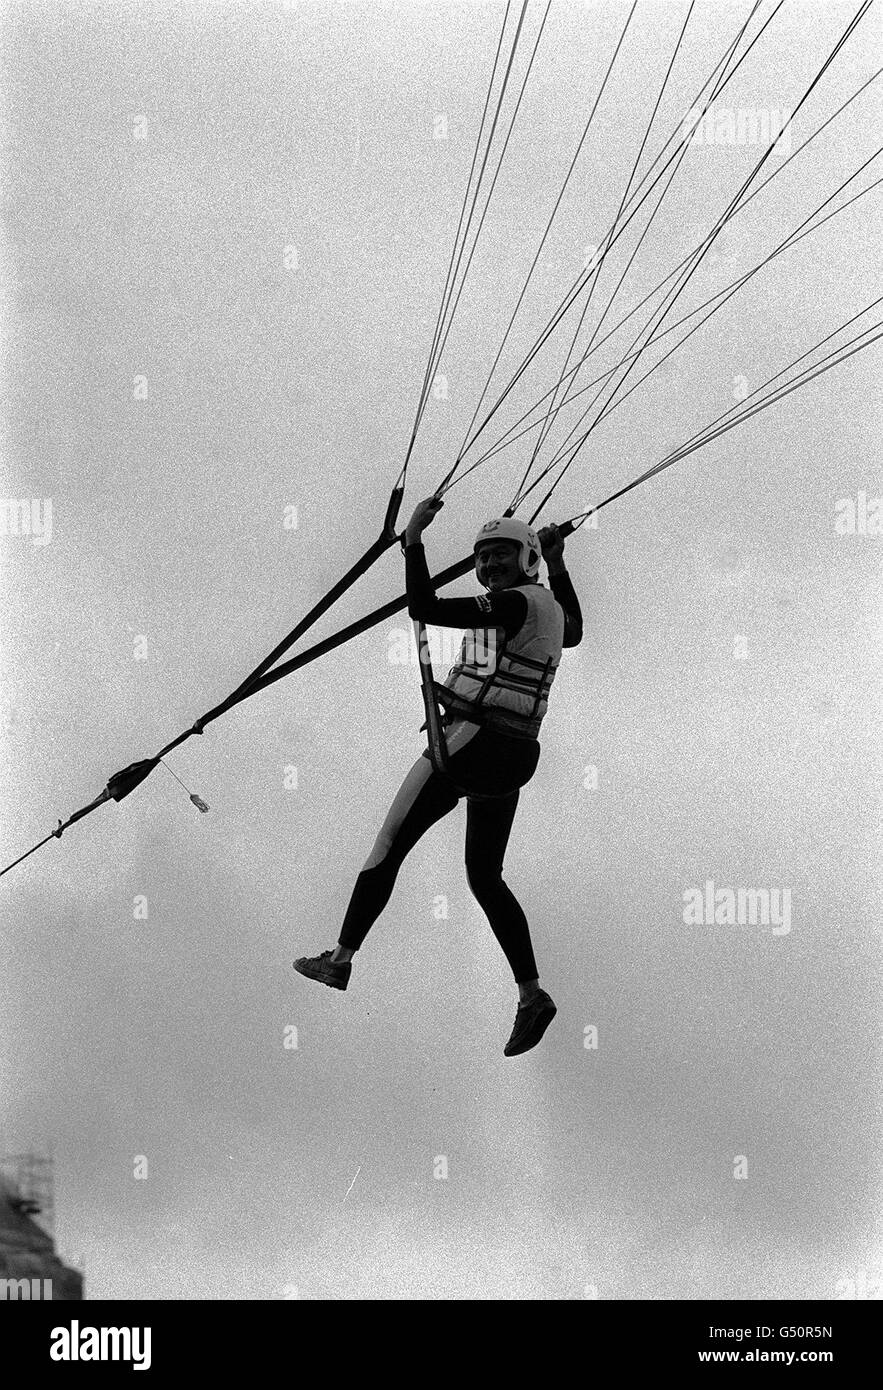 Greater London Council (GLC) leader Ken Livingstone parascending on the River Thames in London, in front of the Houses of Parliament, to promote the council's Thamesday, when a major attraction is to be the Landbeach Parakite Display team. Stock Photo